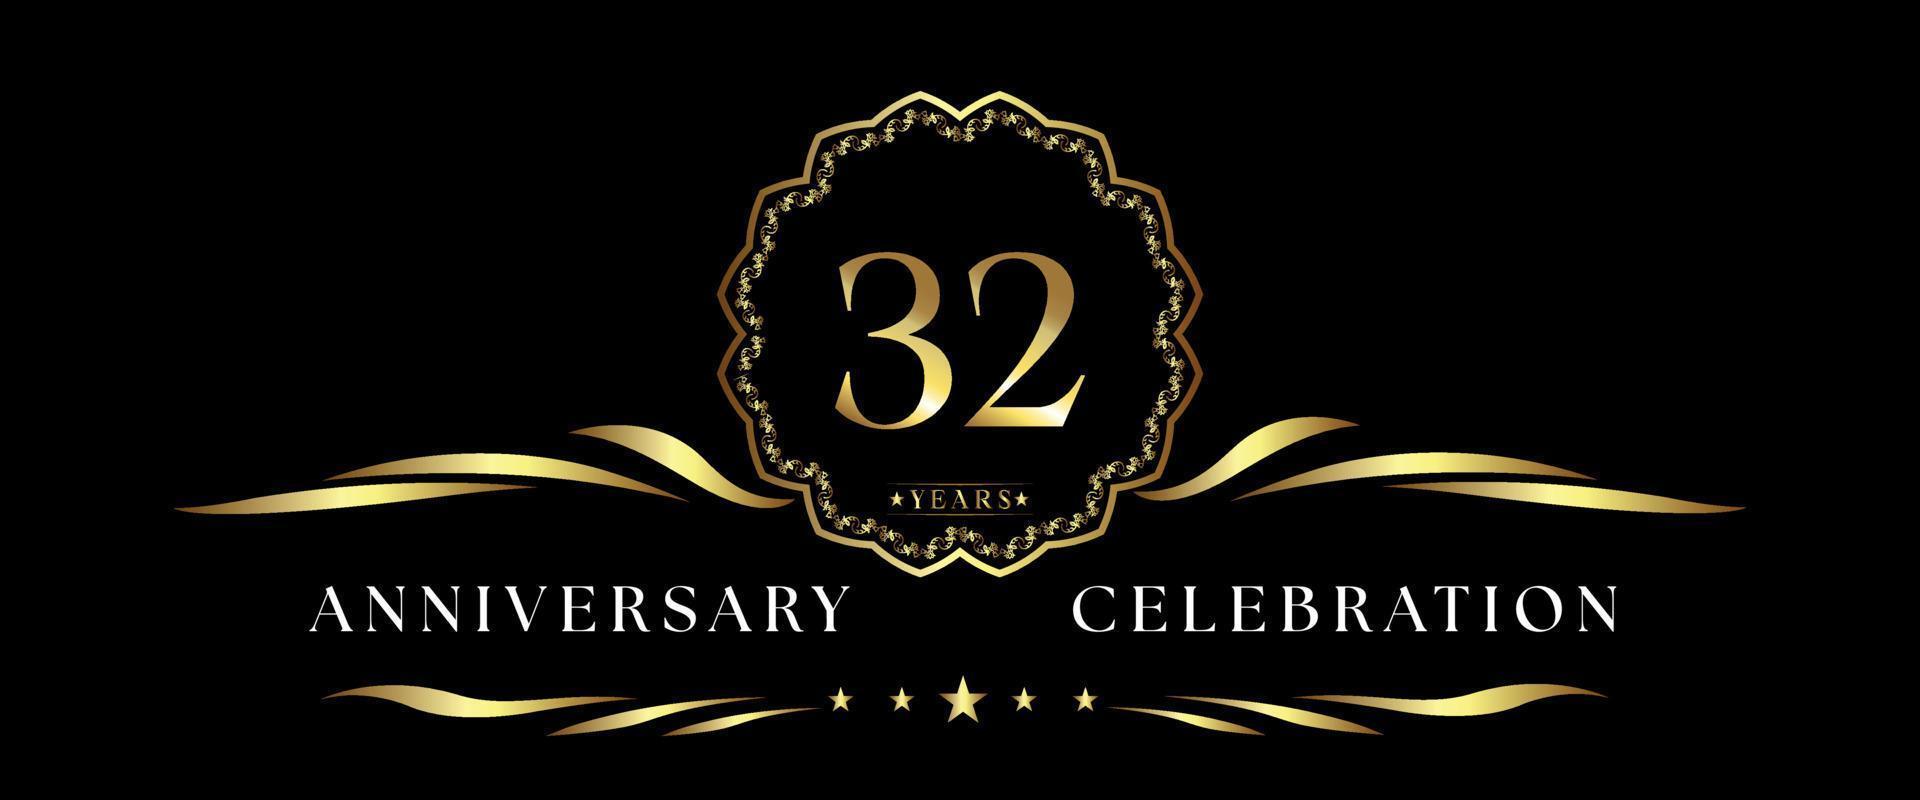 32 years anniversary celebration with gold decorative frame isolated on black background. Vector design for greeting card, birthday party, wedding, event party, ceremony. 32 years Anniversary logo.